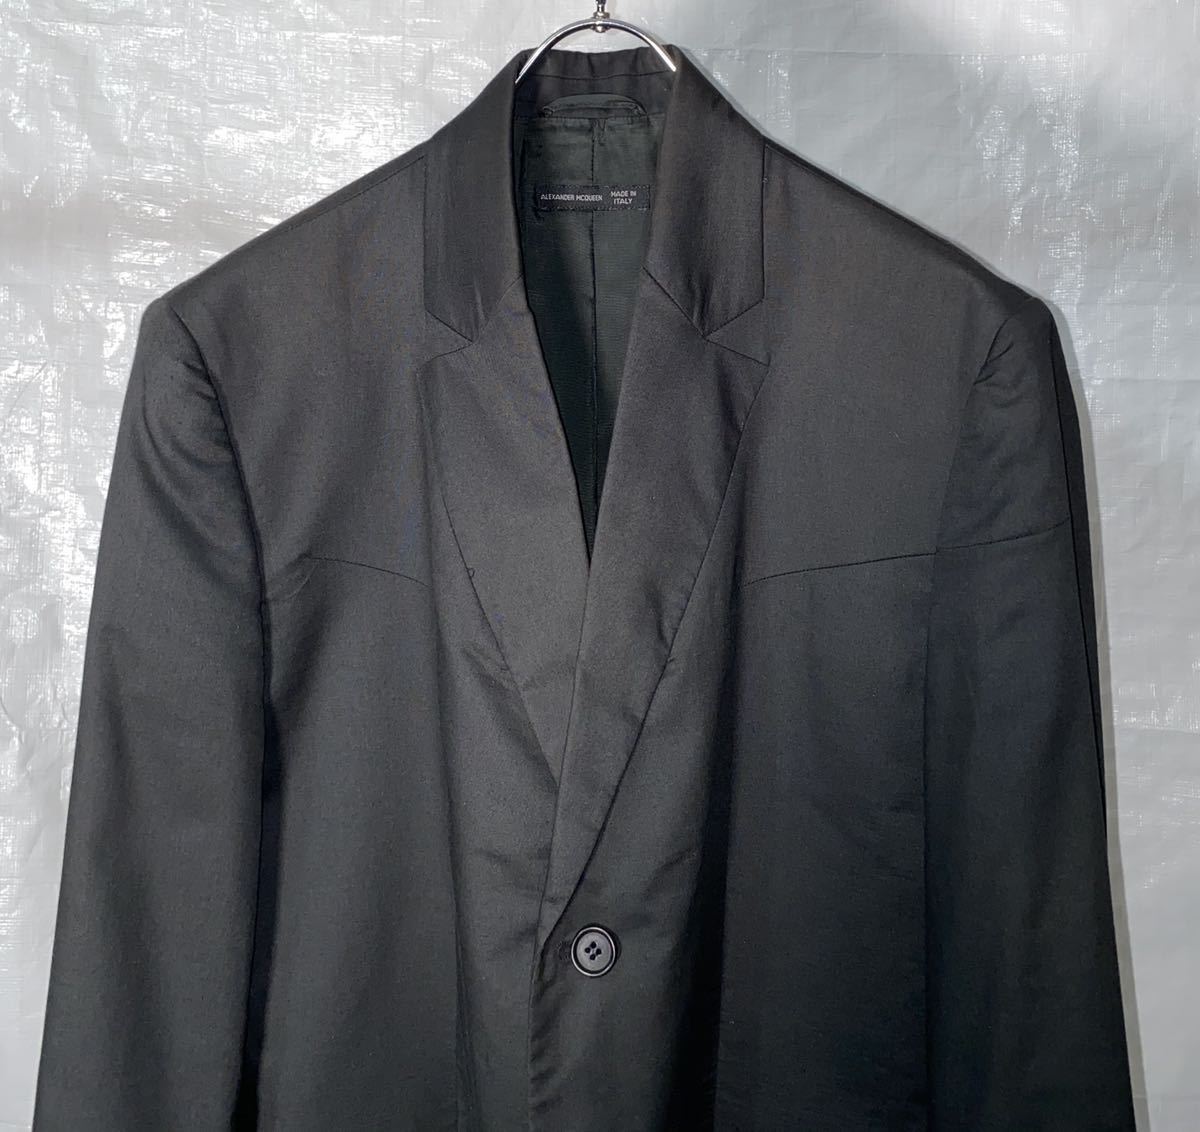 90s ALEXANDER MCQUEEN trompe l\'oeil LAPEL TAILORED JACKET Alexander McQueen the first period to long p Louis yu jacket 